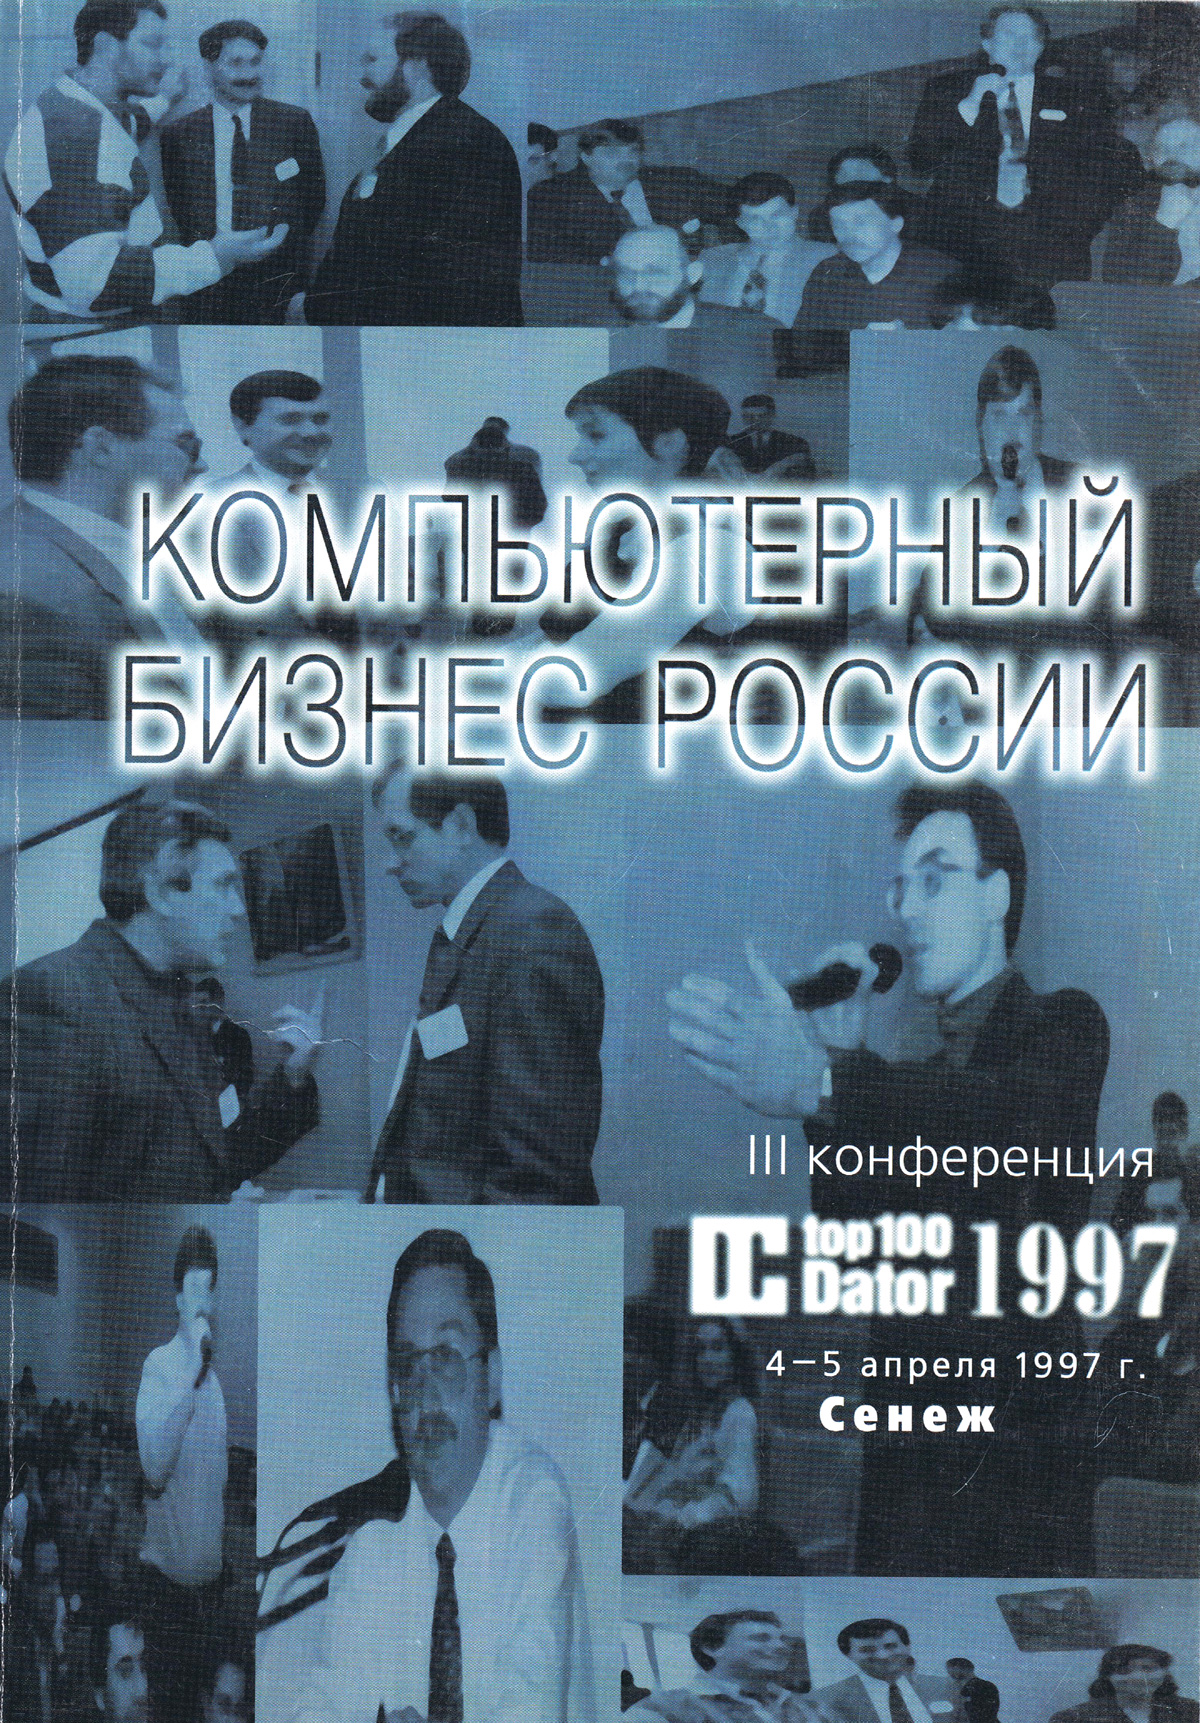 The Myths about Internet Business, By Gregory Gromov, Proceedings of the III National Conference of Computer Business in Russia, 1997, Moscow. Dator1997_cover